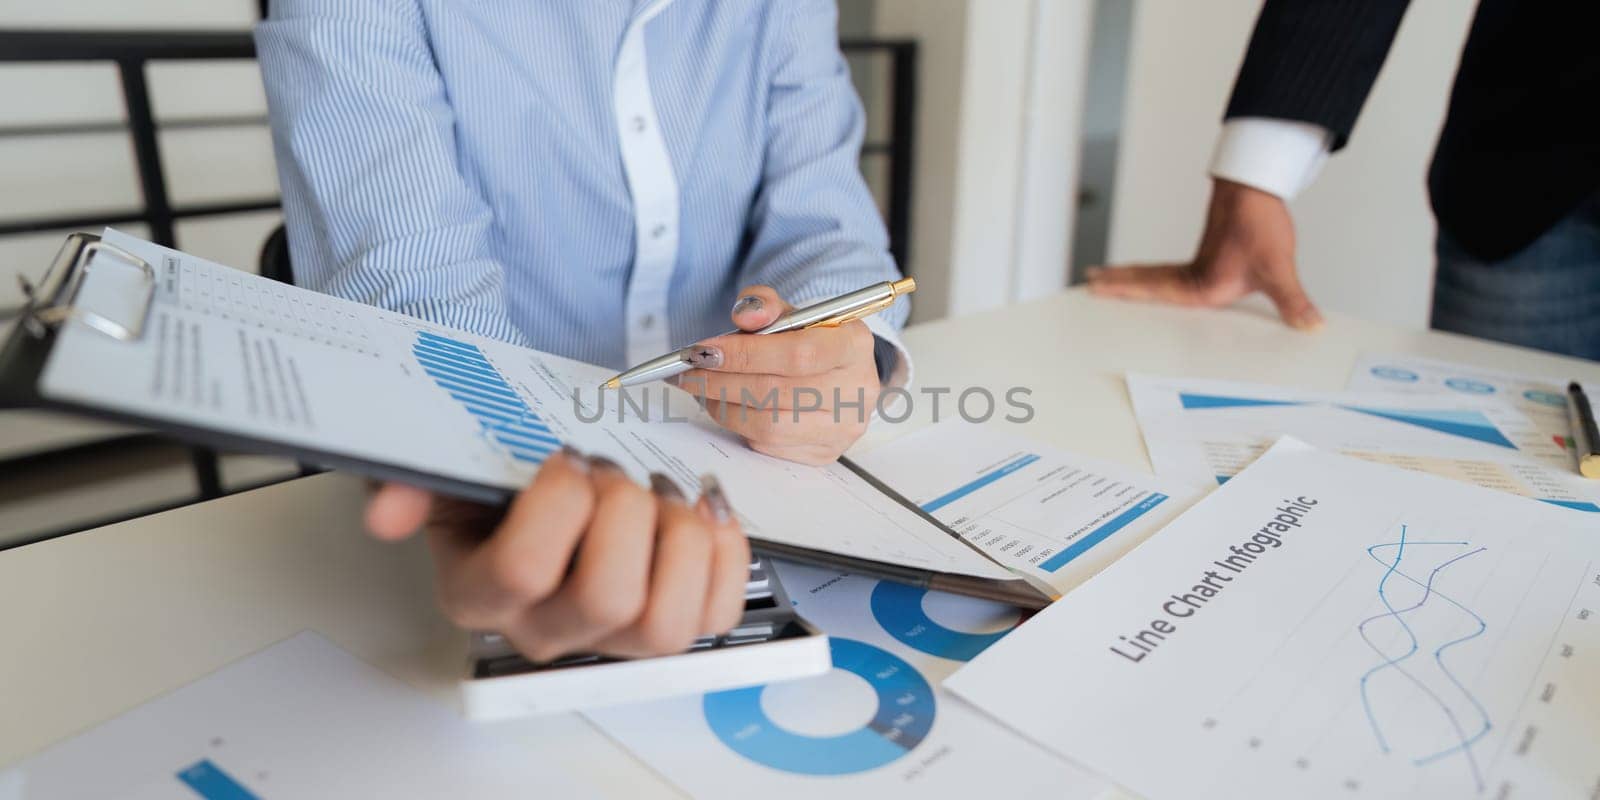 Business team analyzes financial business finance reports on laptop and graph documents during corporate meeting discussion showing successful teamwork, business meeting ideas by nateemee